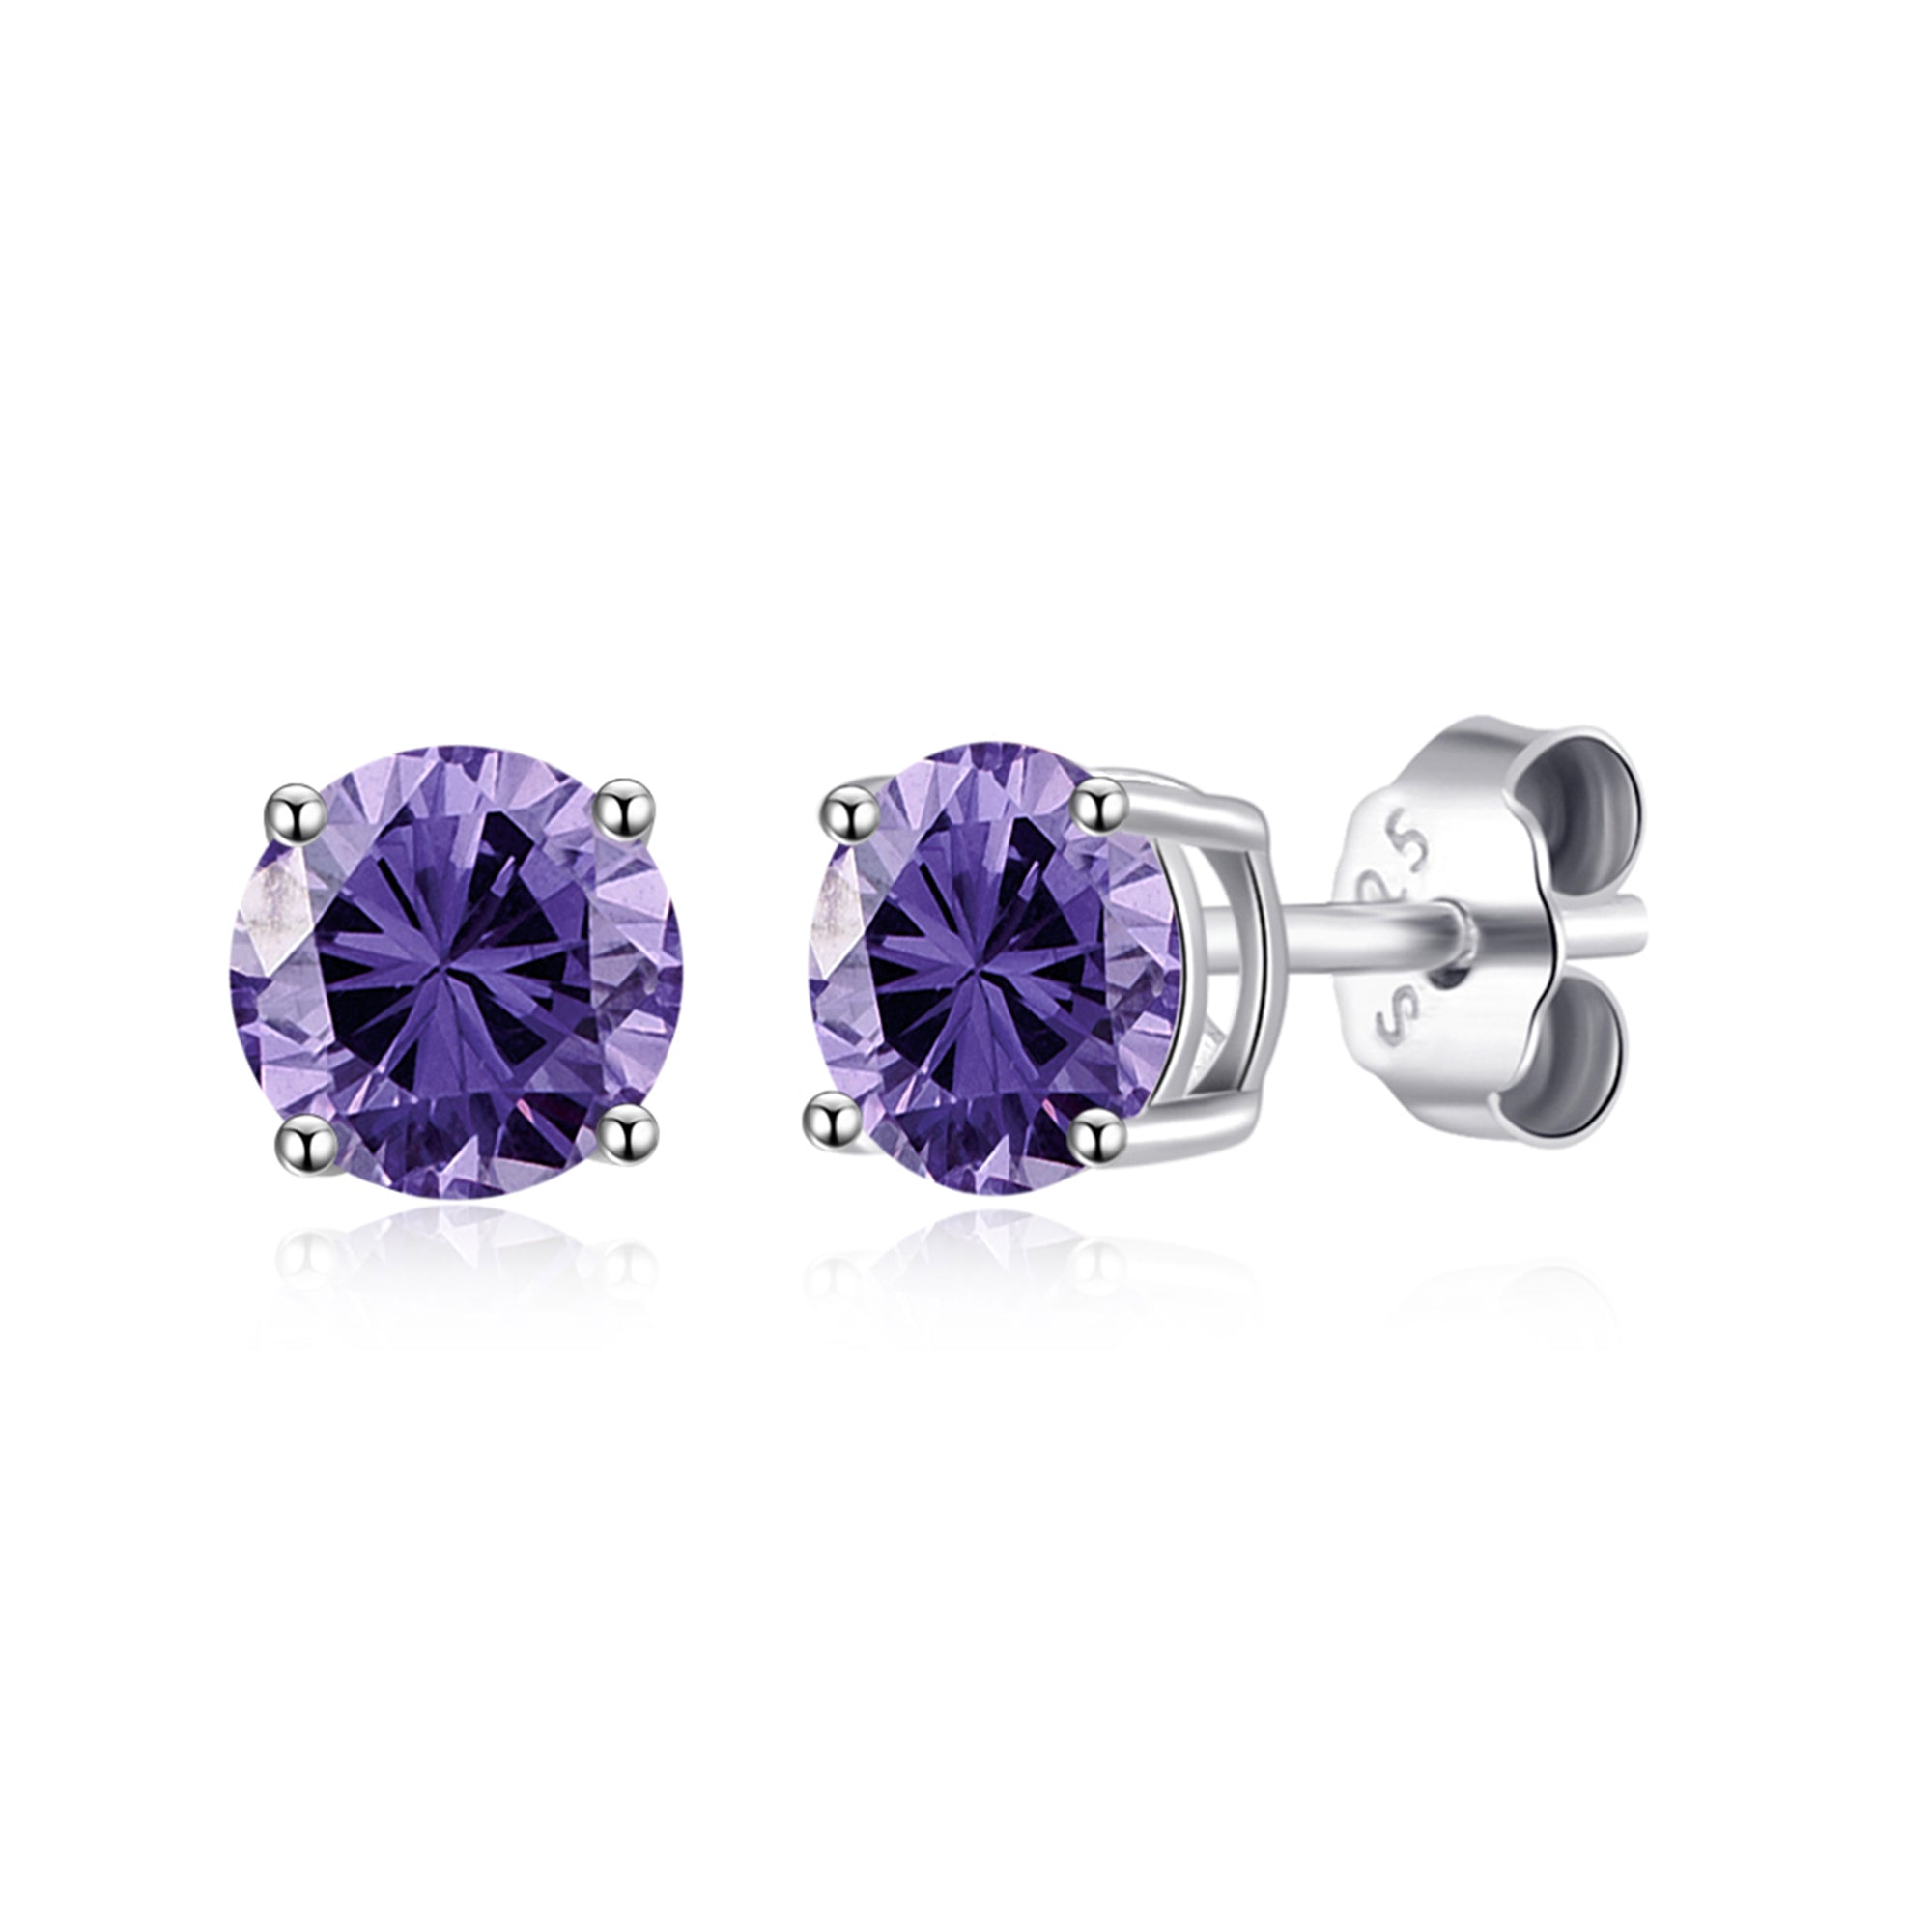 Sterling Silver February (Amethyst) Birthstone Earrings Created with Zircondia® Crystals